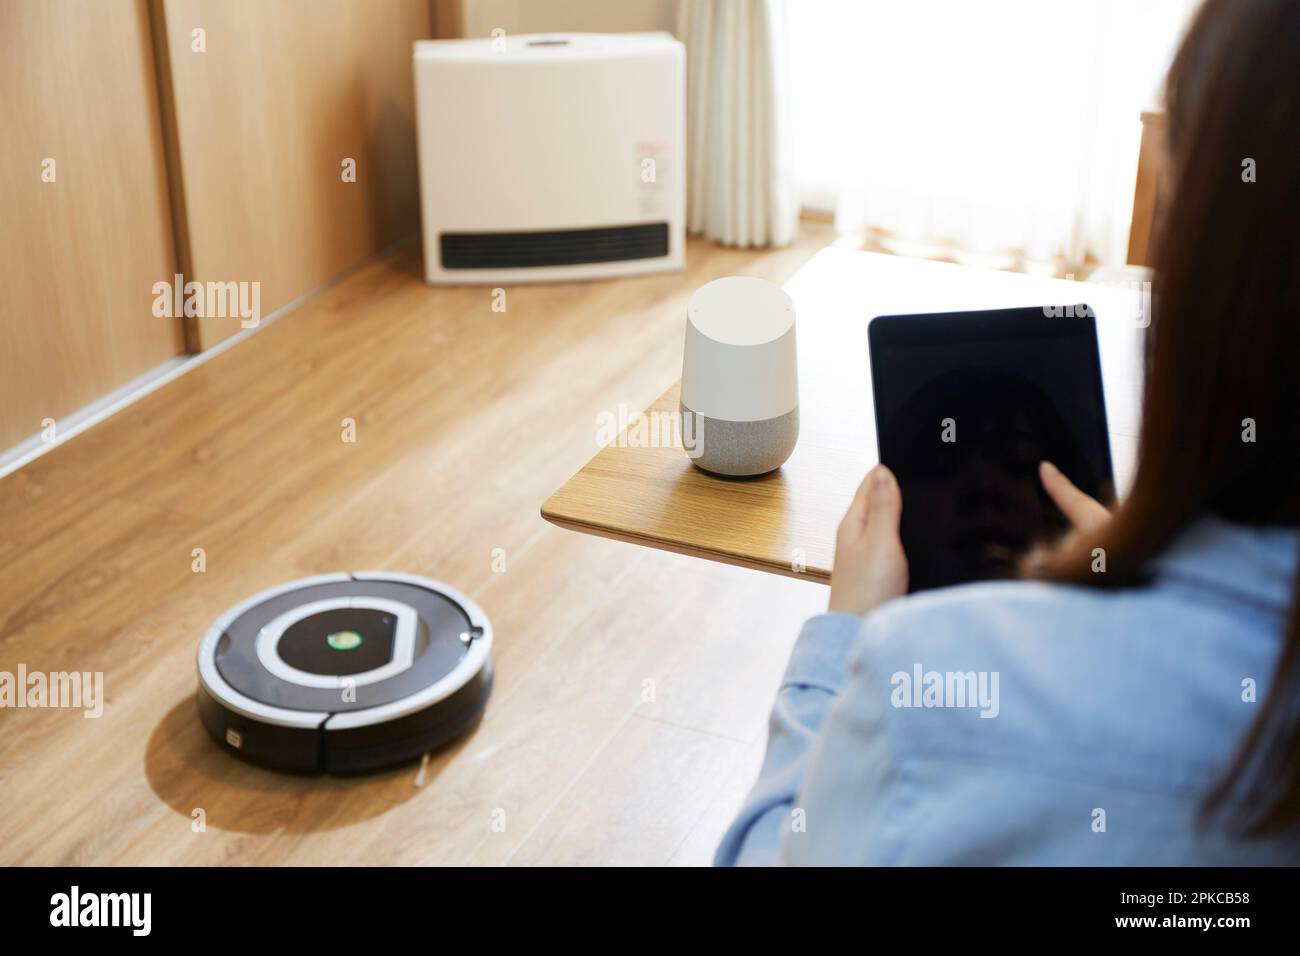 Cleaning robot and AI speaker in the living room Stock Photo